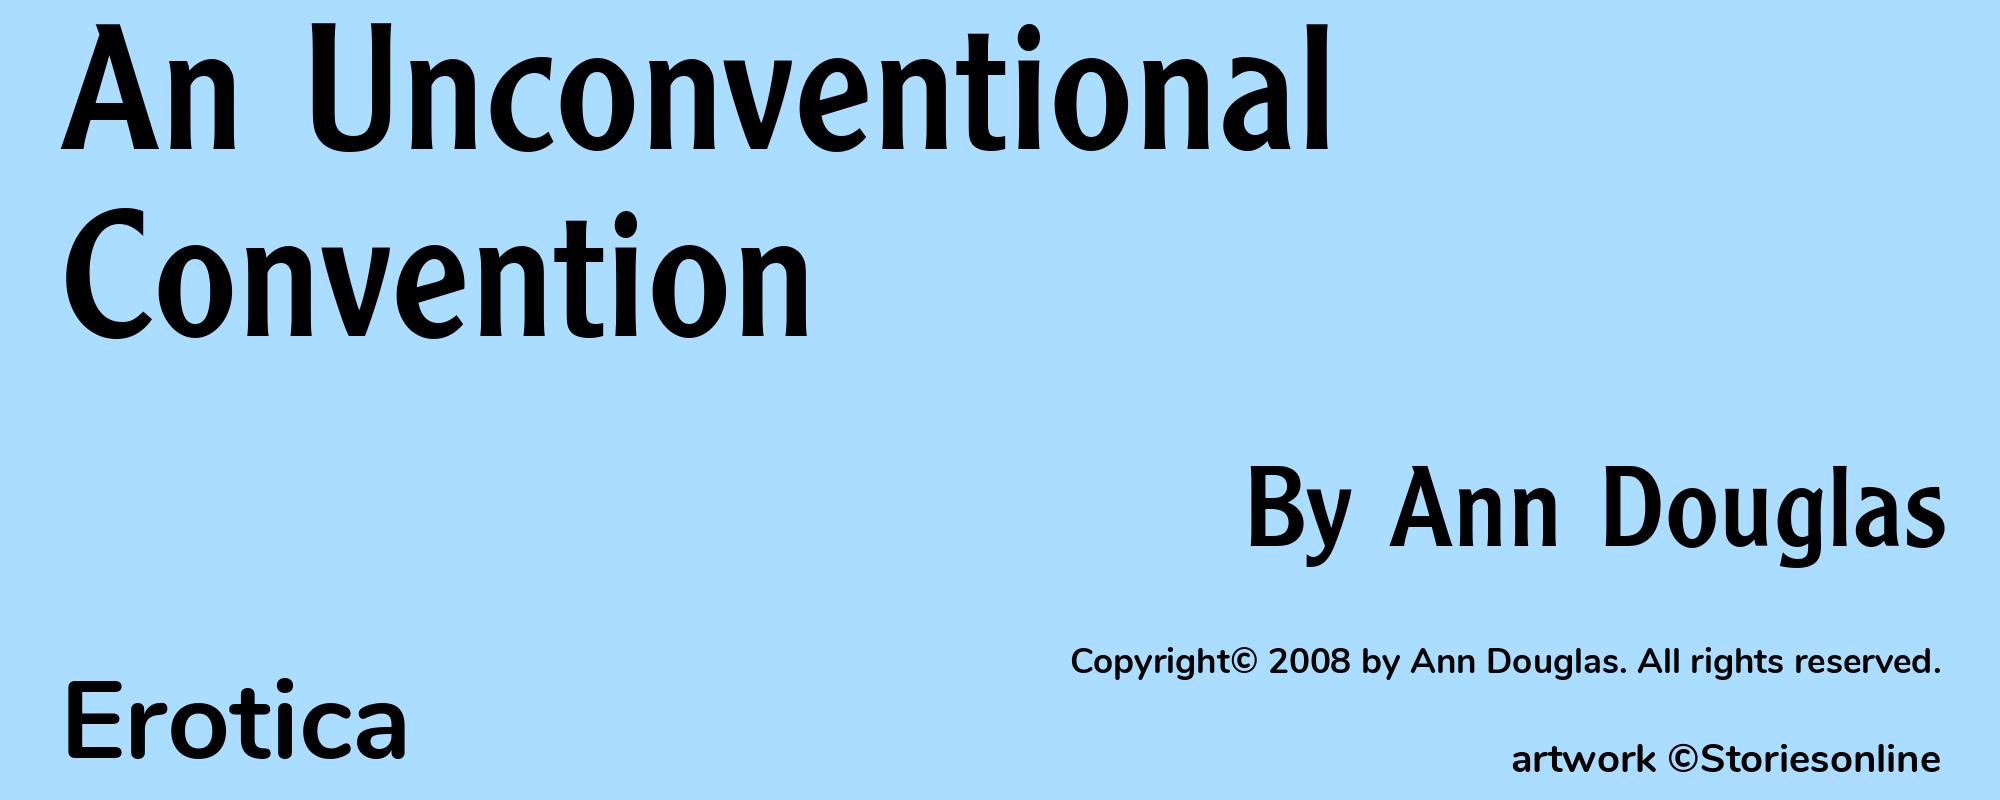 An Unconventional Convention - Cover